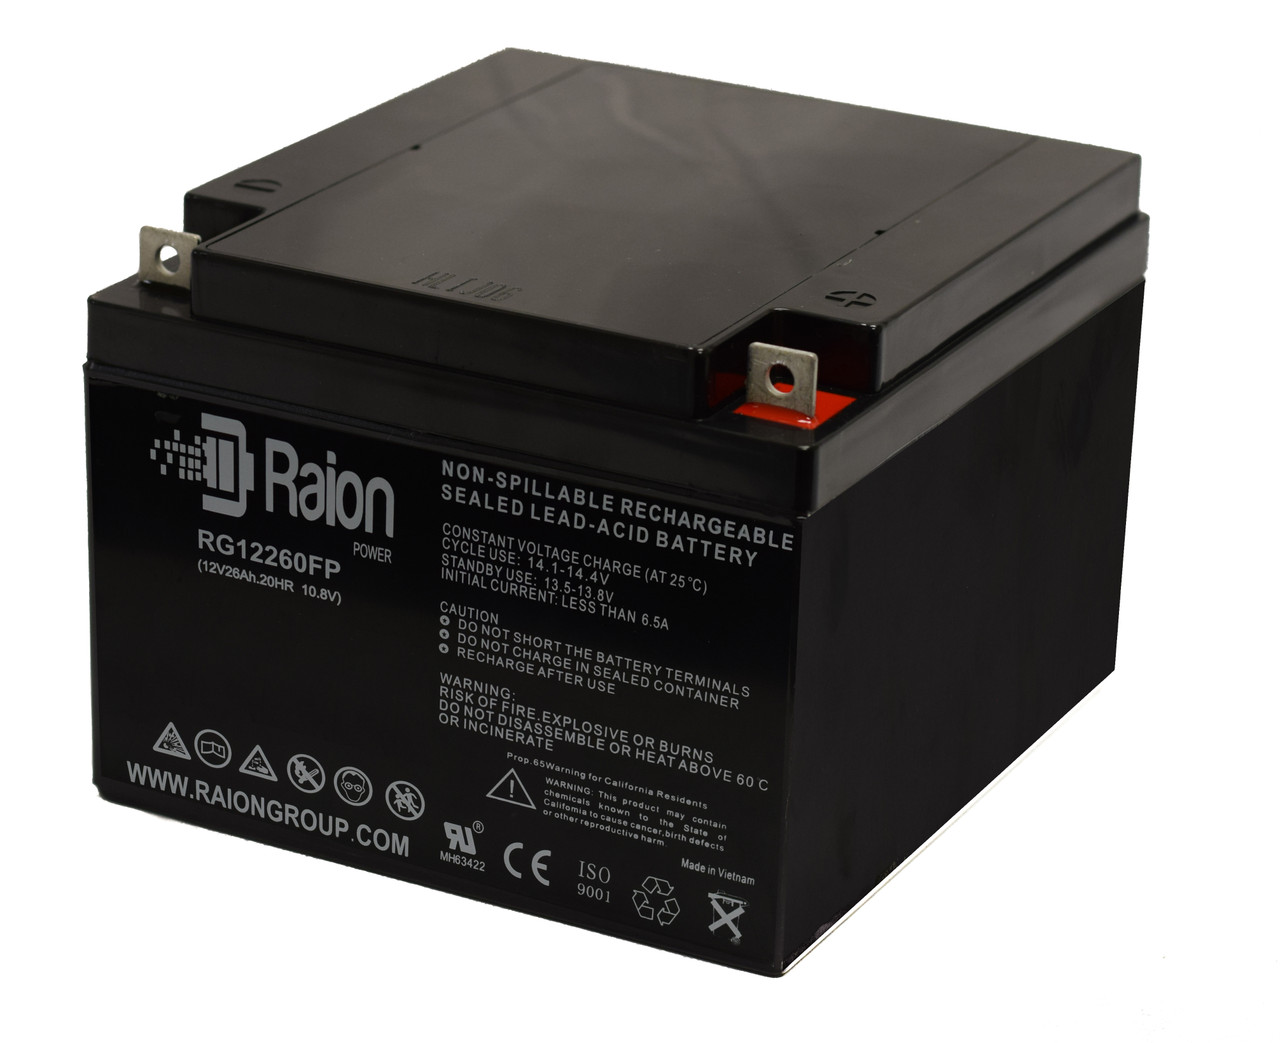 Raion Power Replacement 12V 26Ah Battery for TLV12280 - 1 Pack